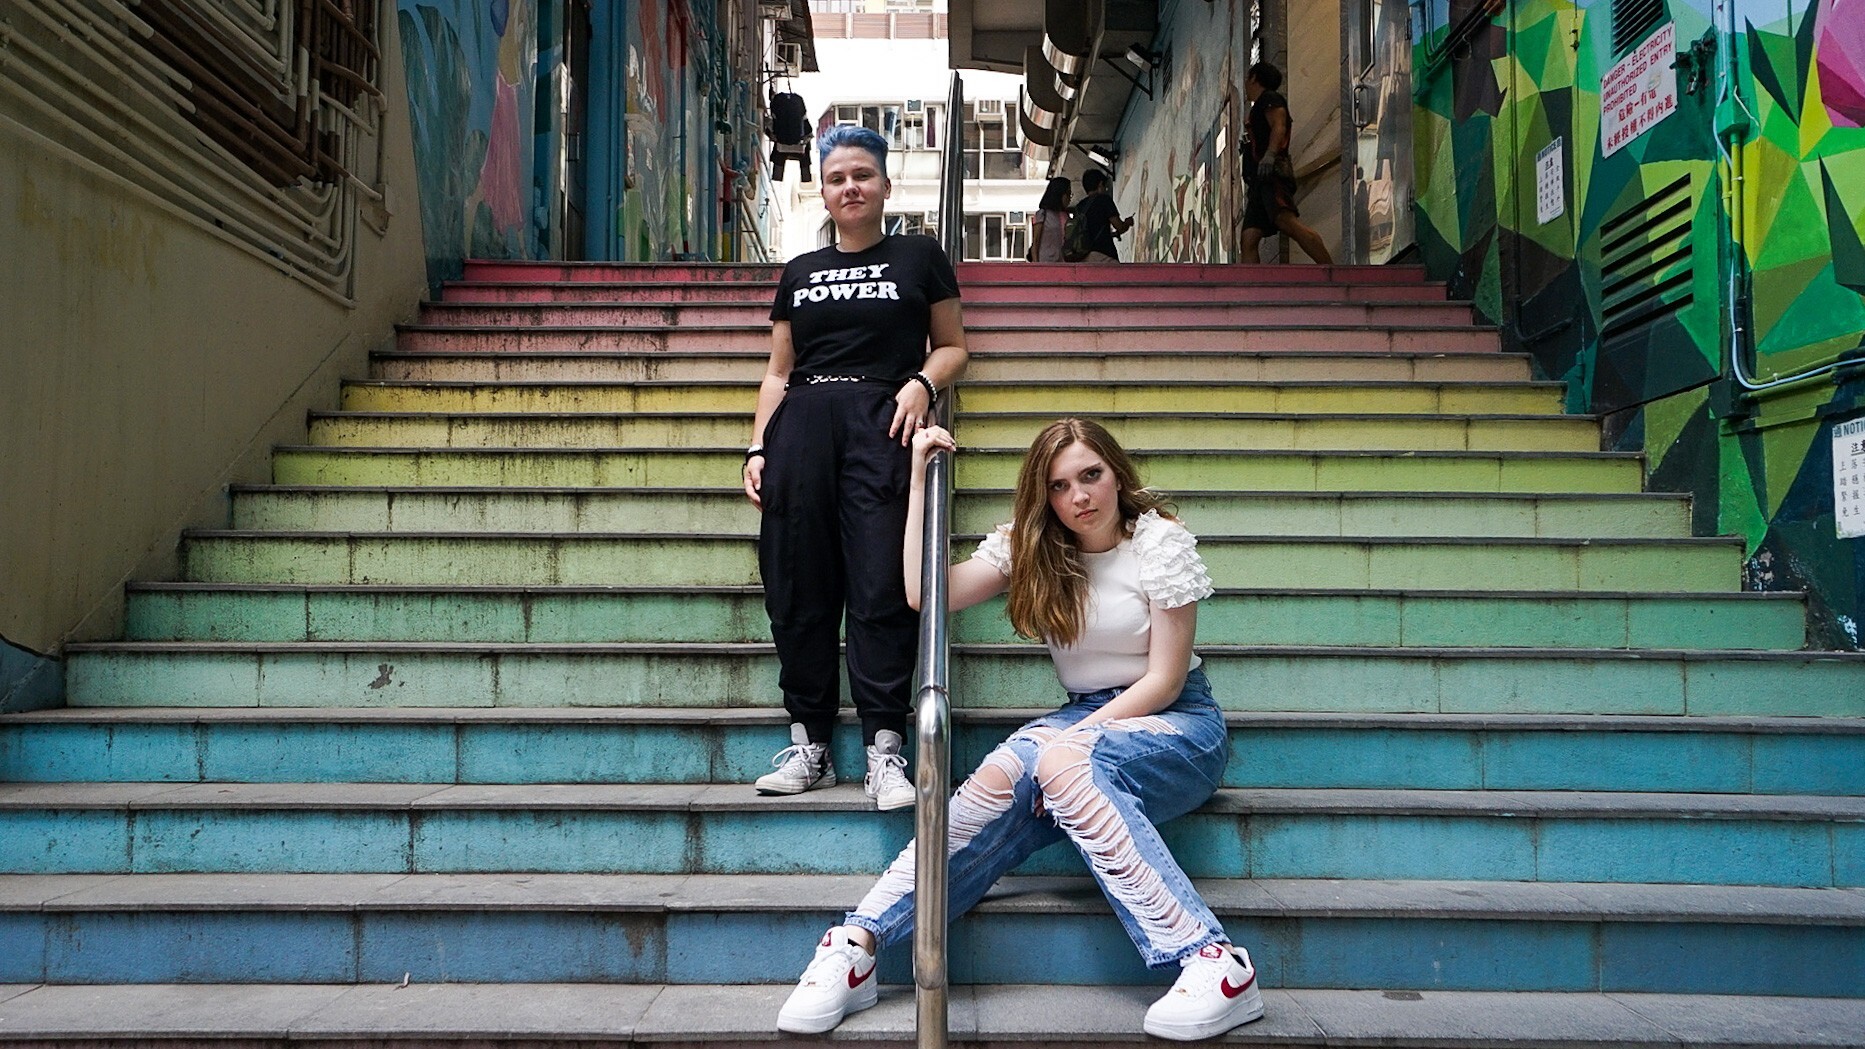 These teens are hoping to make a change and make life better for LGBTQ+ teens in Hong Kong.